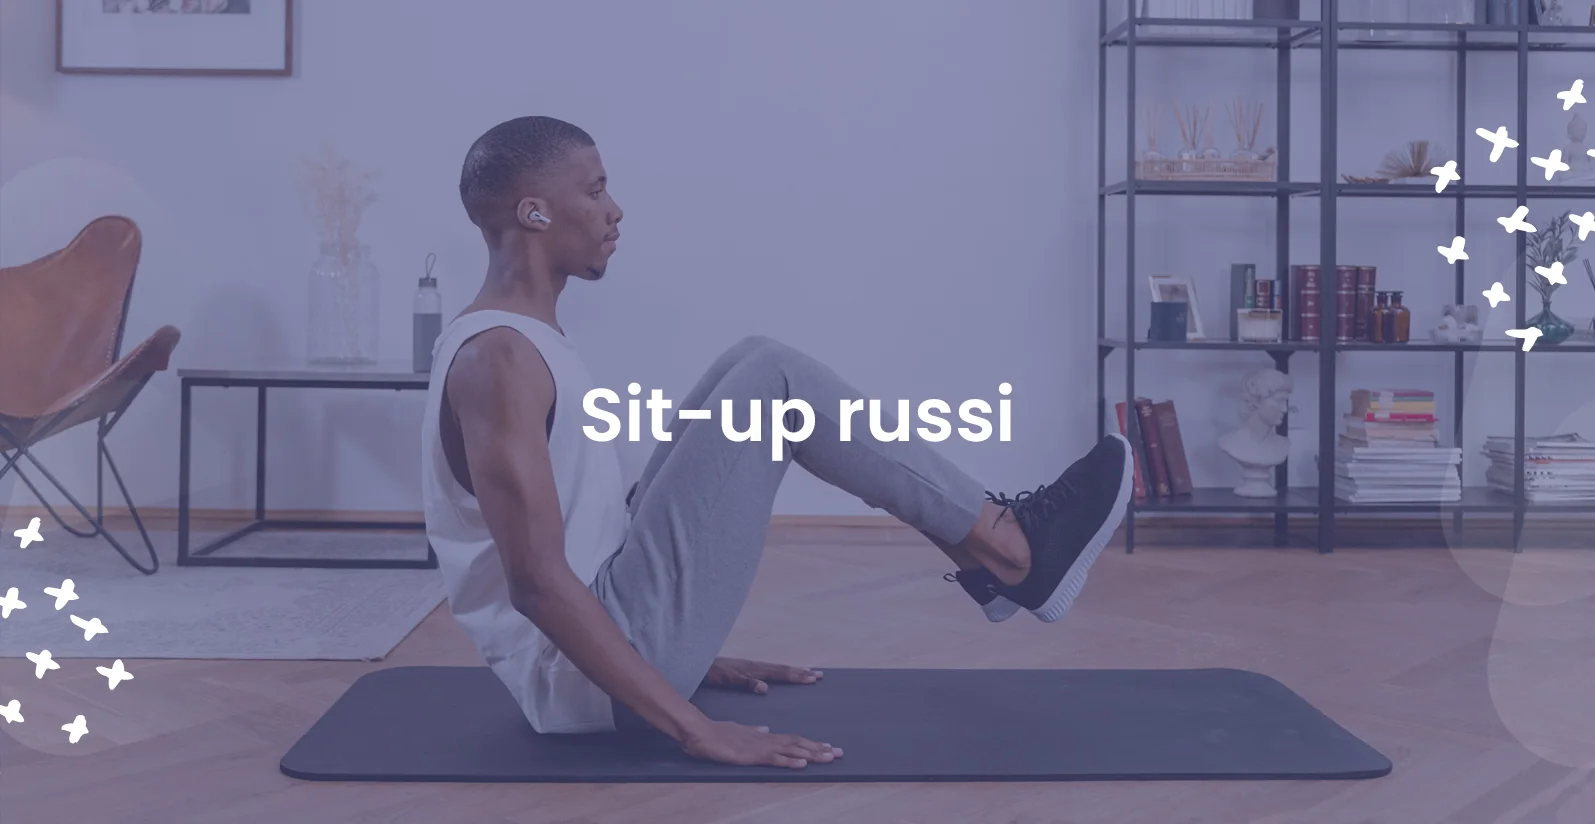 Sit-up russi